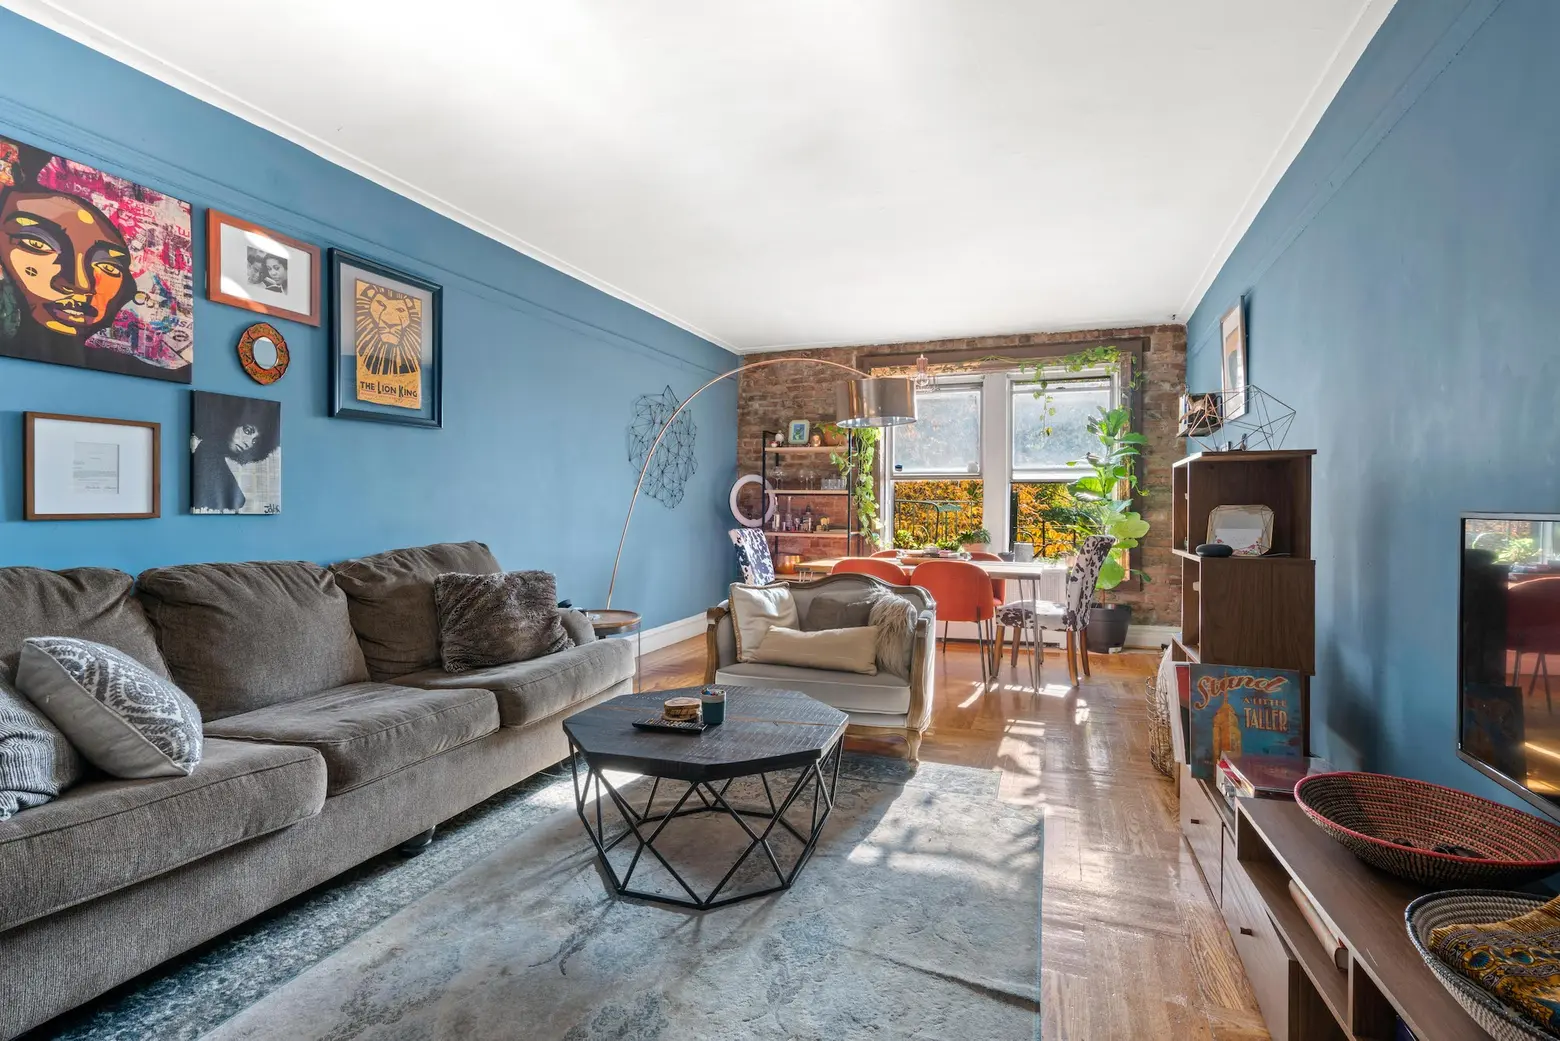 This one-bedroom co-op in the Bronx is asking just $285K